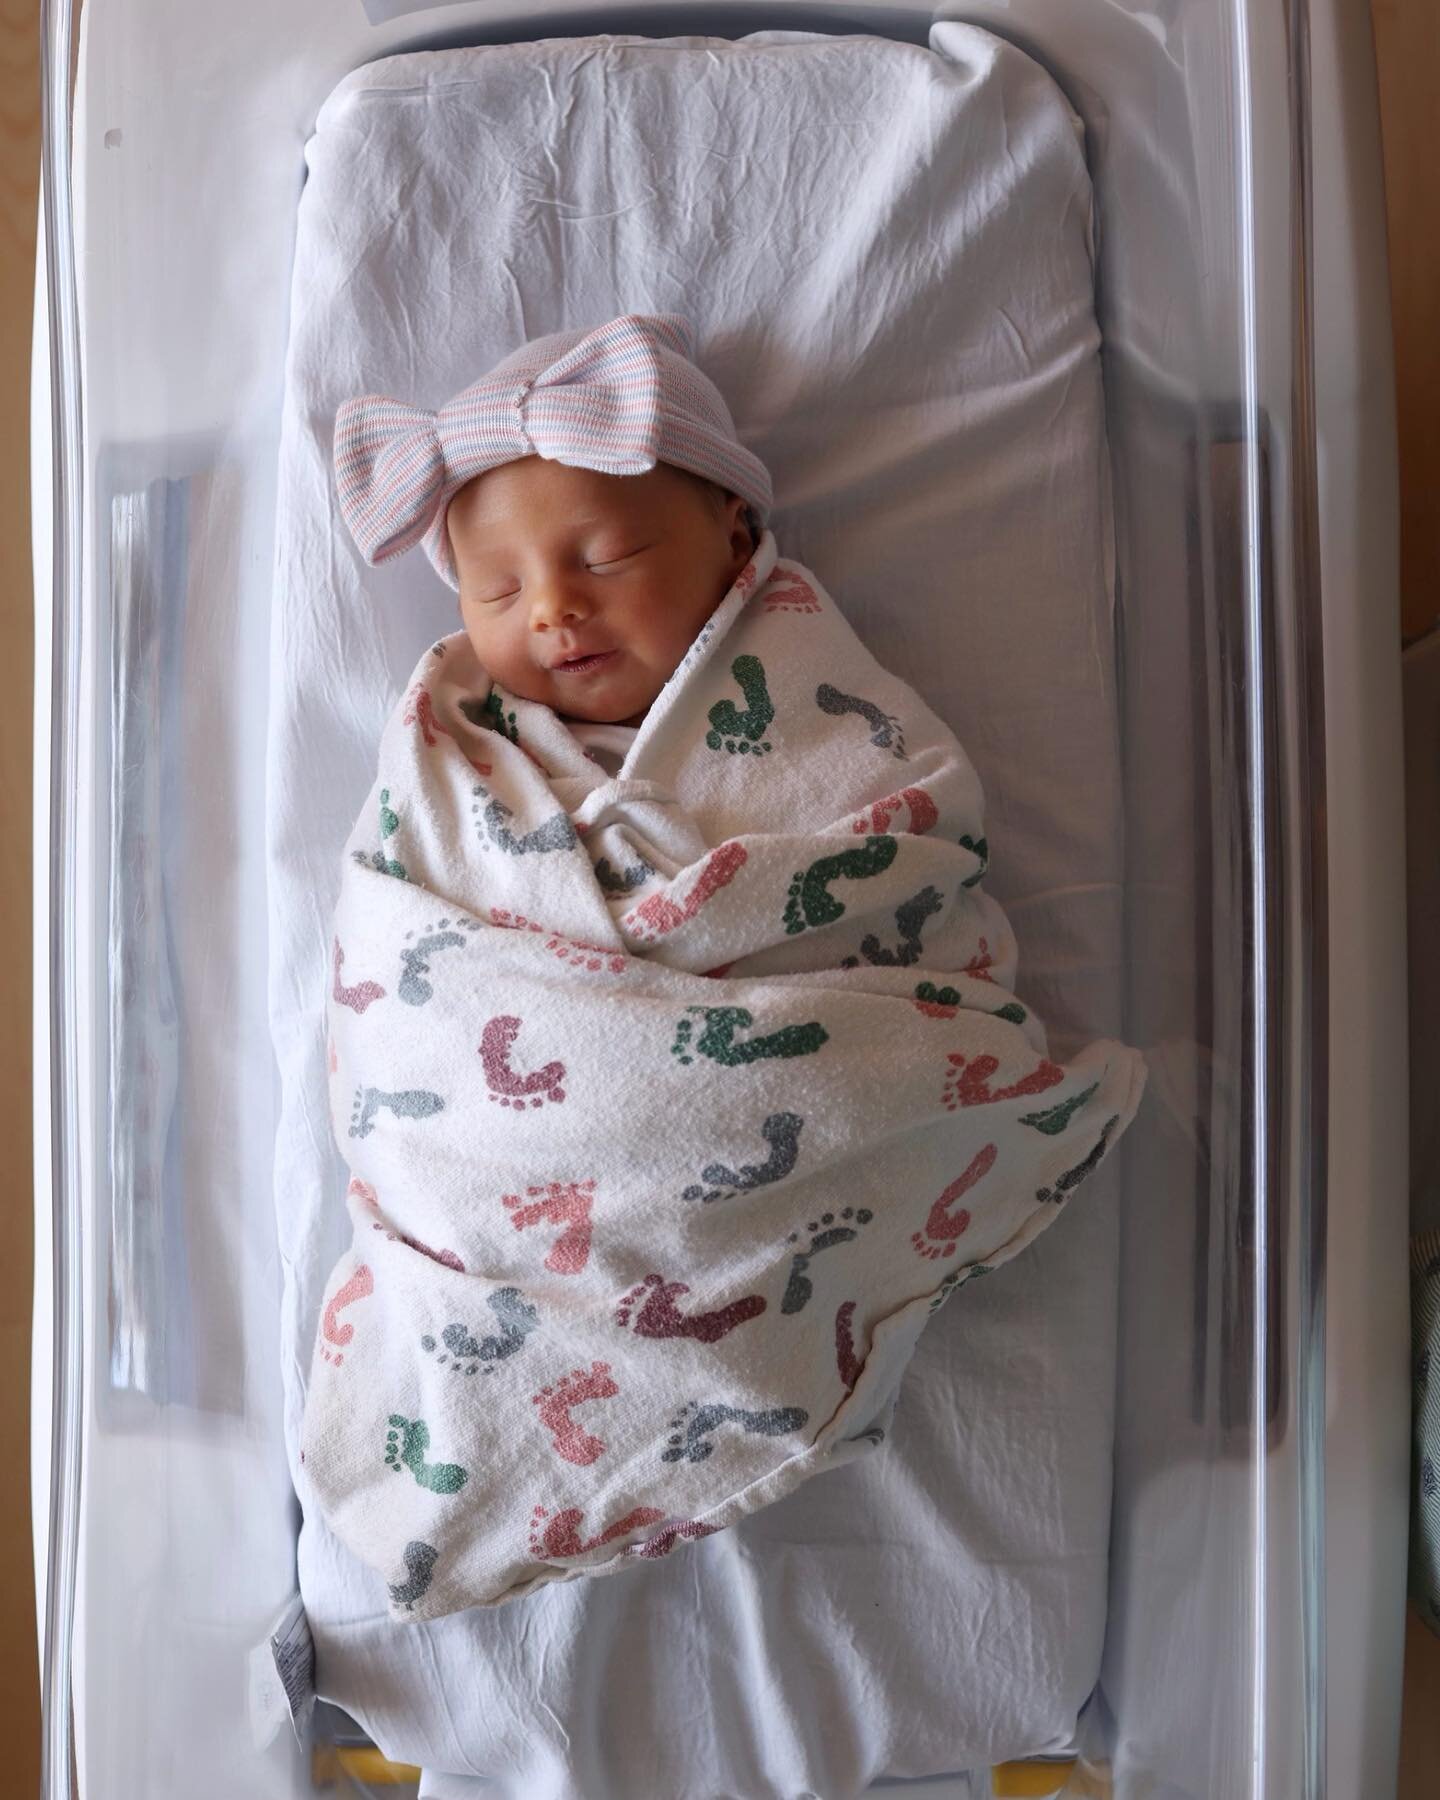 Earth Day was extra special this year &lt;3

Welcome to world Vesta Josephine Sapienza!! 

#vestajo #earthdaybirthday #love